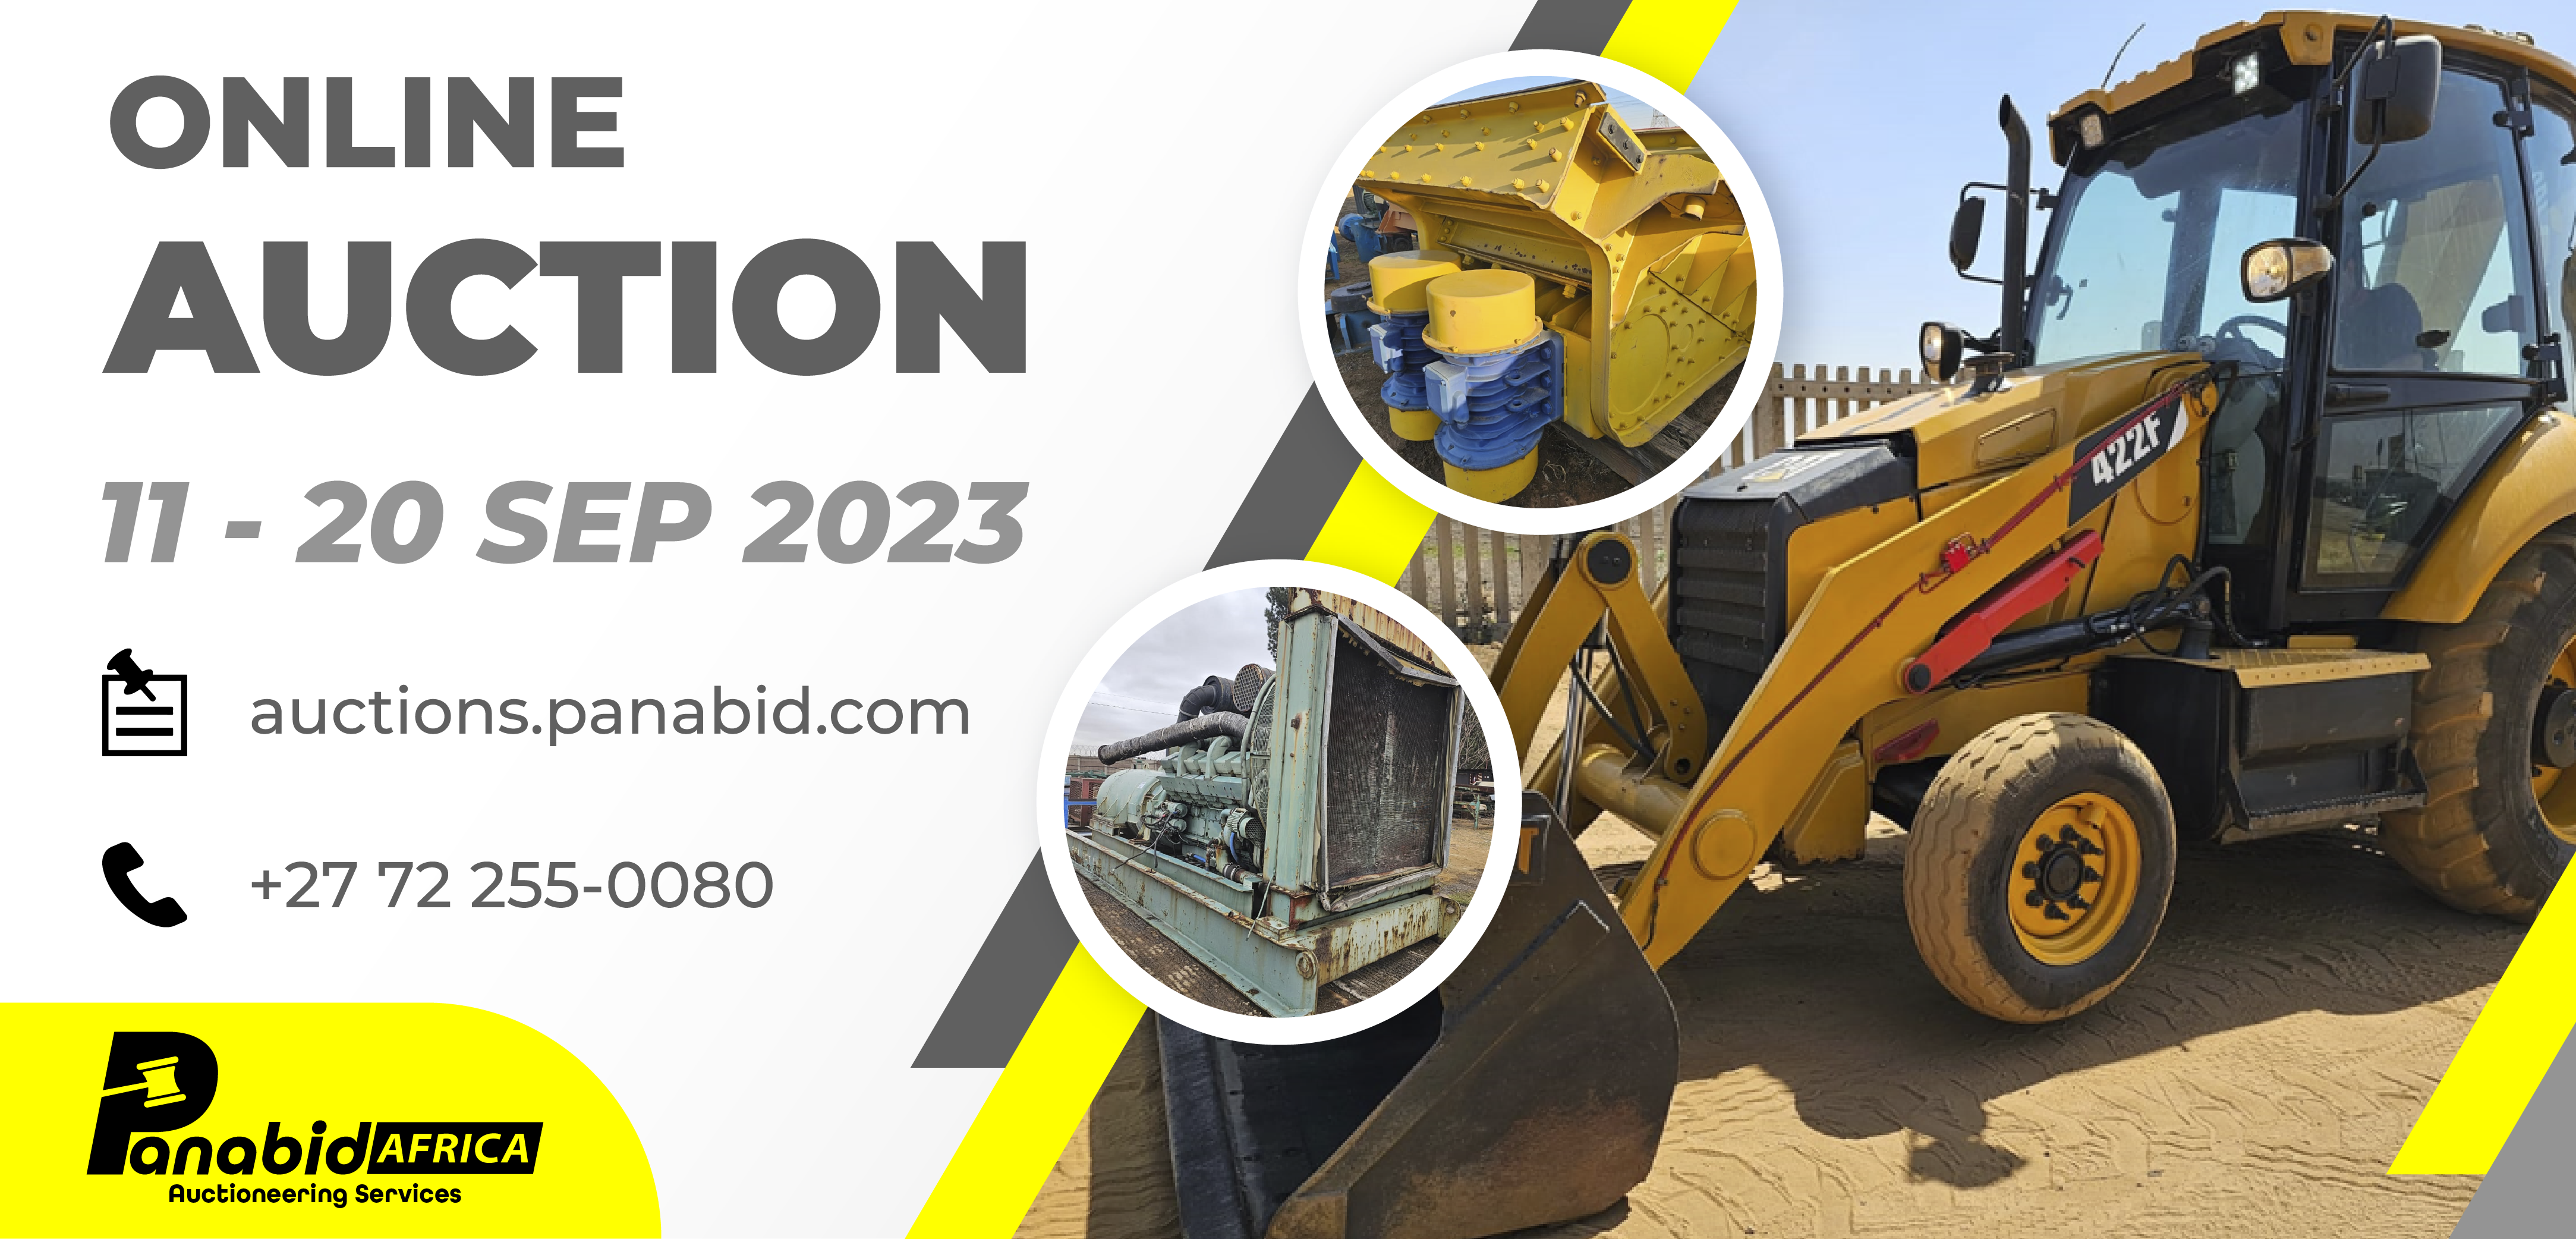 ONLINE AUCTION OF SURPLUS MINING, INDUSTRIAL AND CONSTRUCTION EQUIPMENT: CRUSHERS, SCREENS, CONVEYORS, STRUCTURES, PULLEYS, BELTS, CLIPS, VALVES, PUMPS, CONCRETE DUMPERS, BOBCATS, MIXERS, TRUCKS, TRAILERS, TONS OF SCRAP ELECTRIC MOTORS AND COMPONENTS